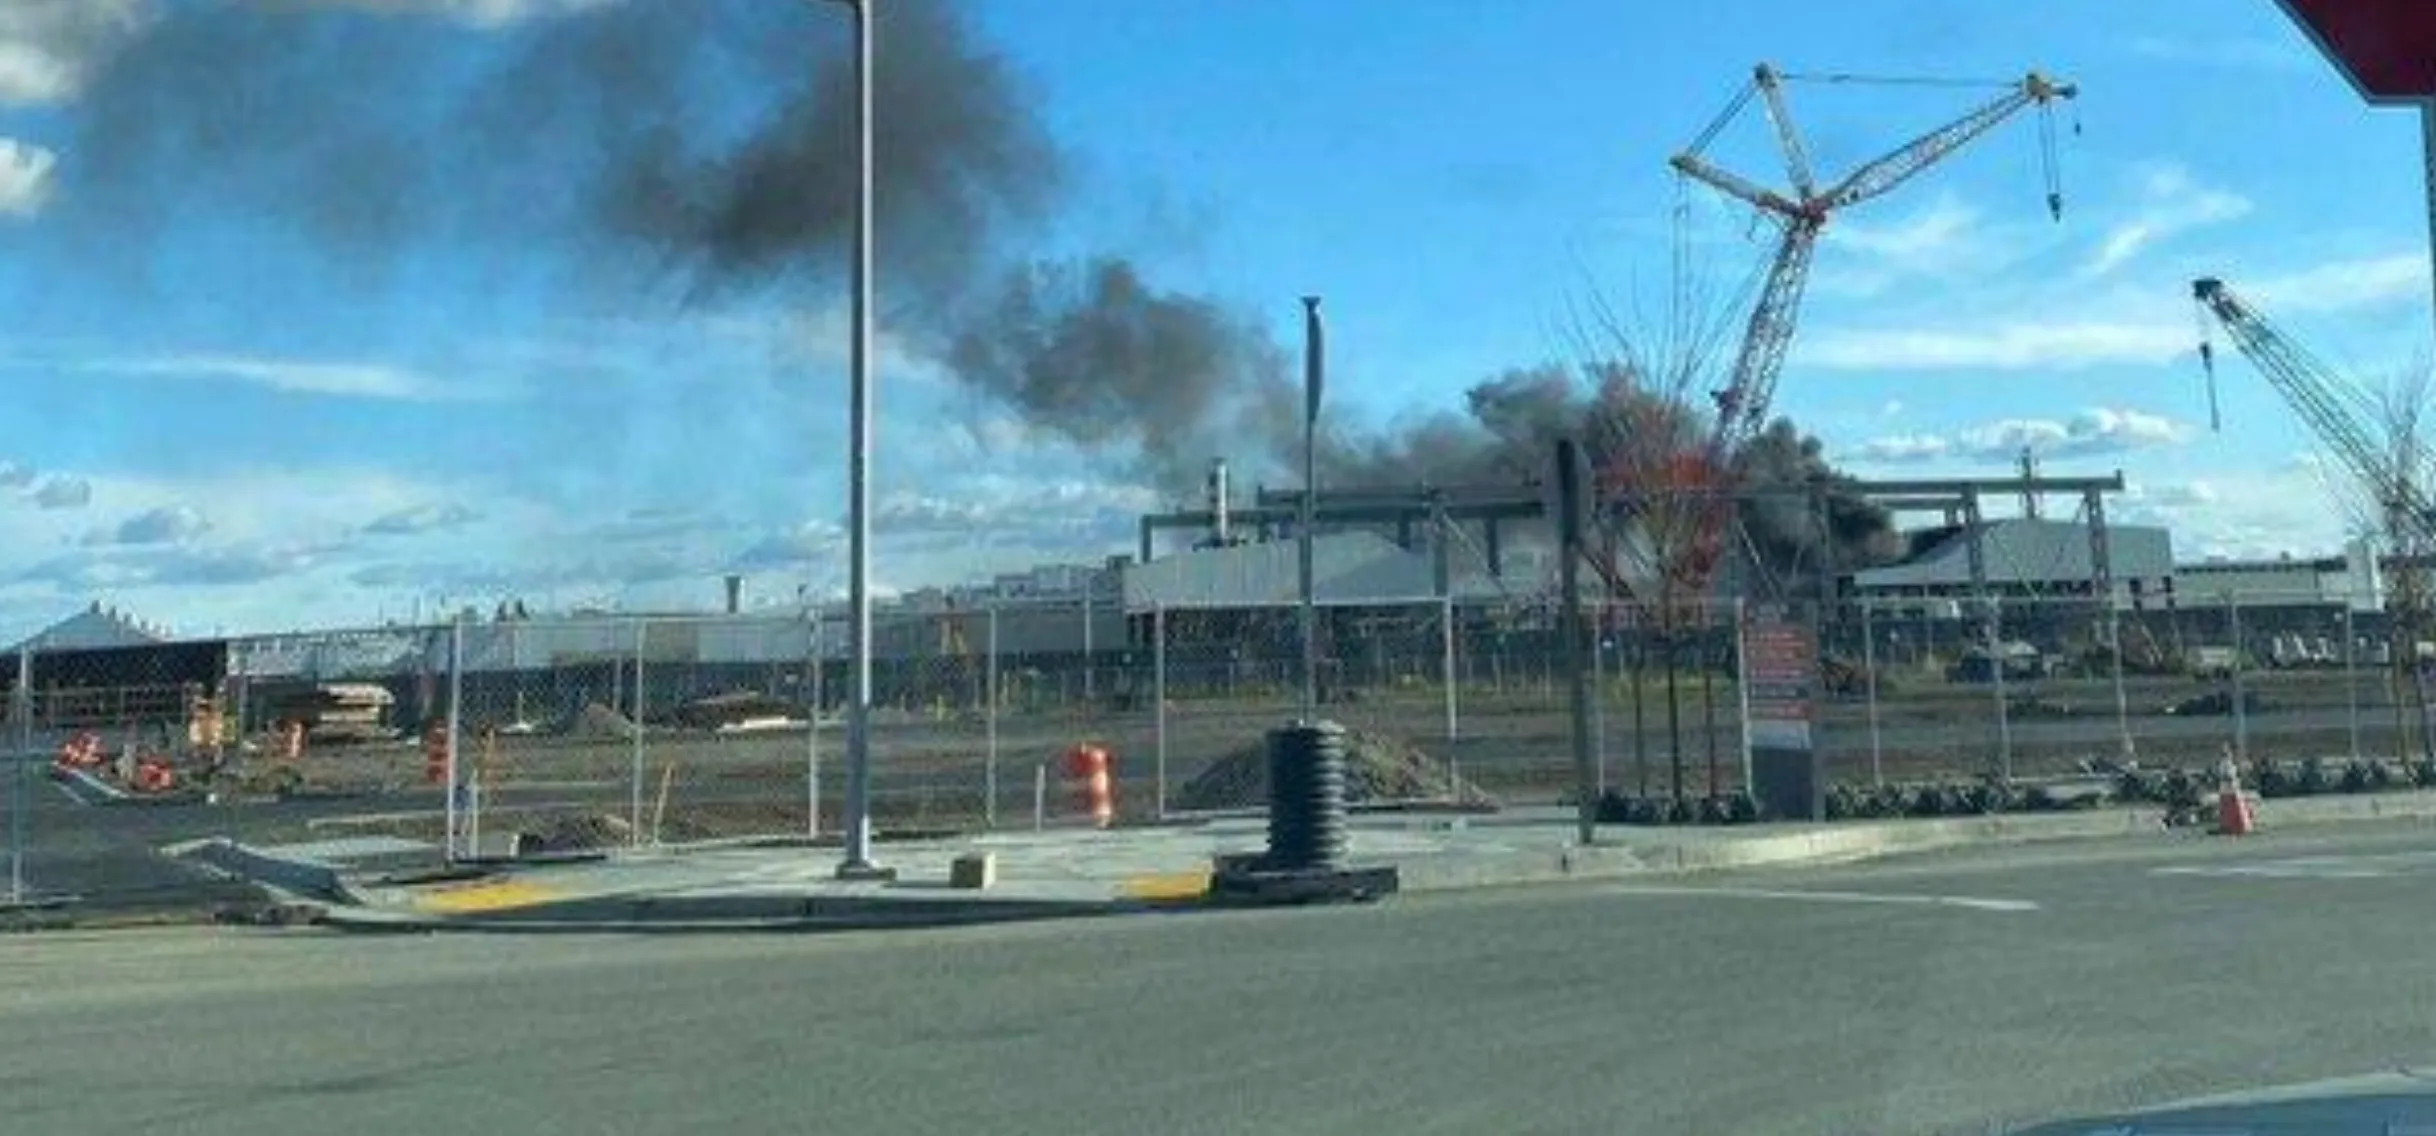 Tesla's Fremont Factory Fire Another Blaze Amid Ongoing Controversies and Environmental Issues